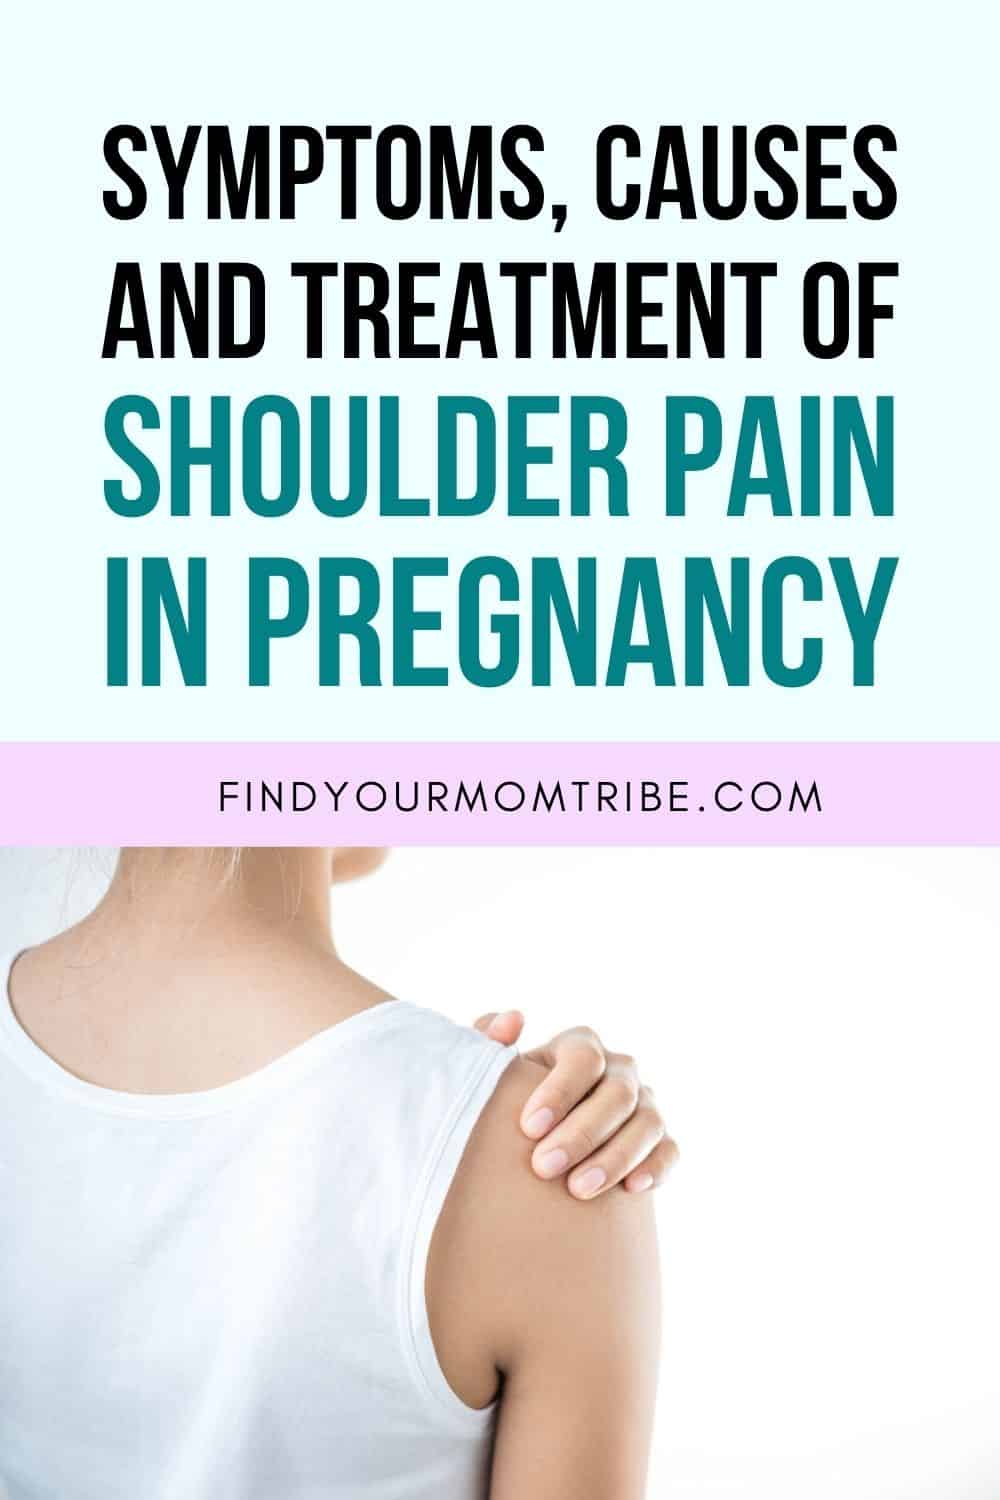 Symptoms, Causes And Treatment Of Shoulder Pain In Pregnancy Pinterest